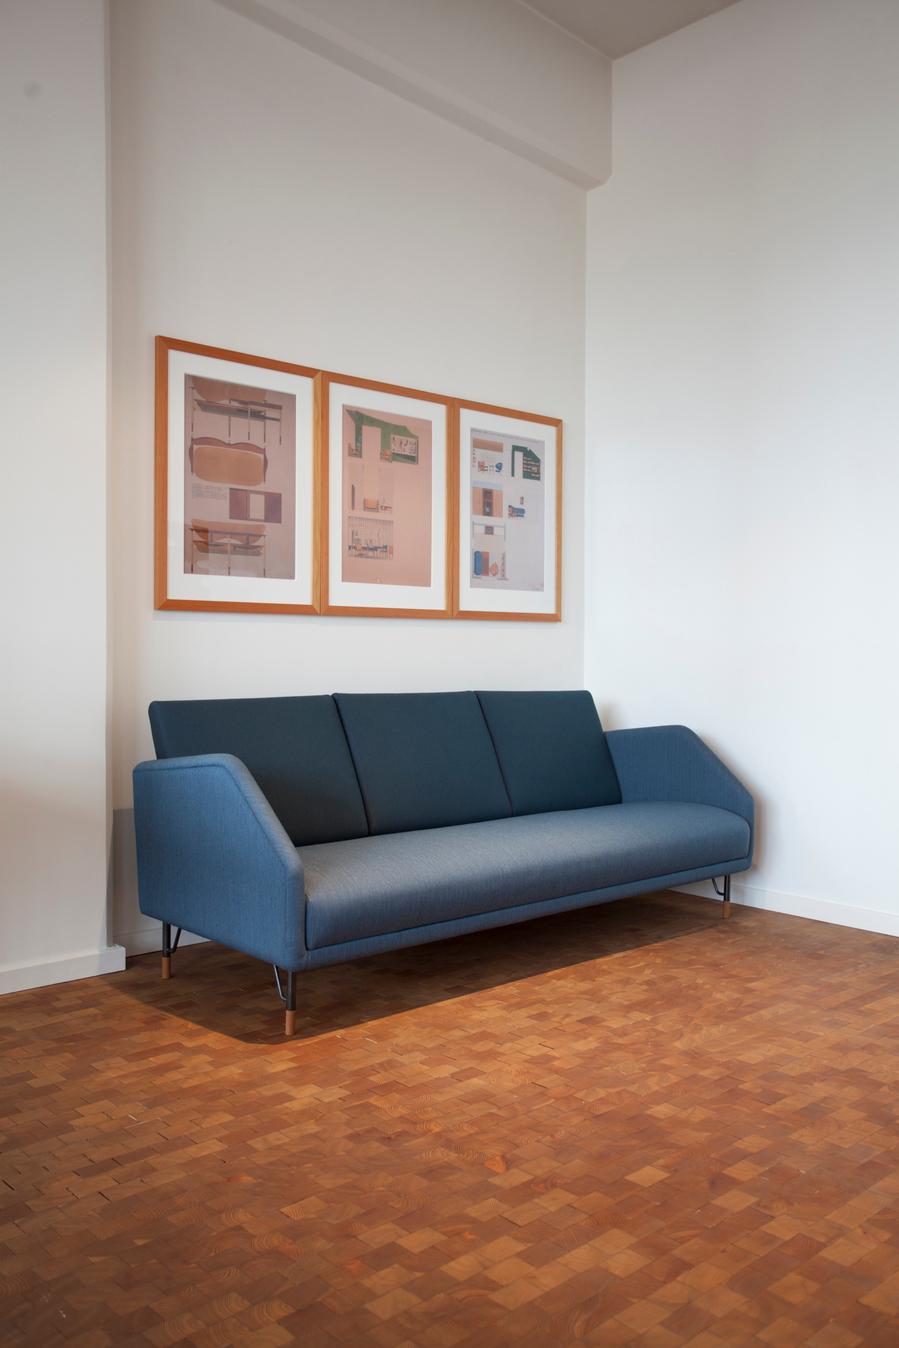 Sofa designed by Finn Juhl in 1953, relaunched in 2012.
Manufactured by House of Finn Juhl in Denmark.

During the 1950s, Finn Juhl designed a series of furniture for the company Bovirke. This series is characterized by a streamlined, industrial